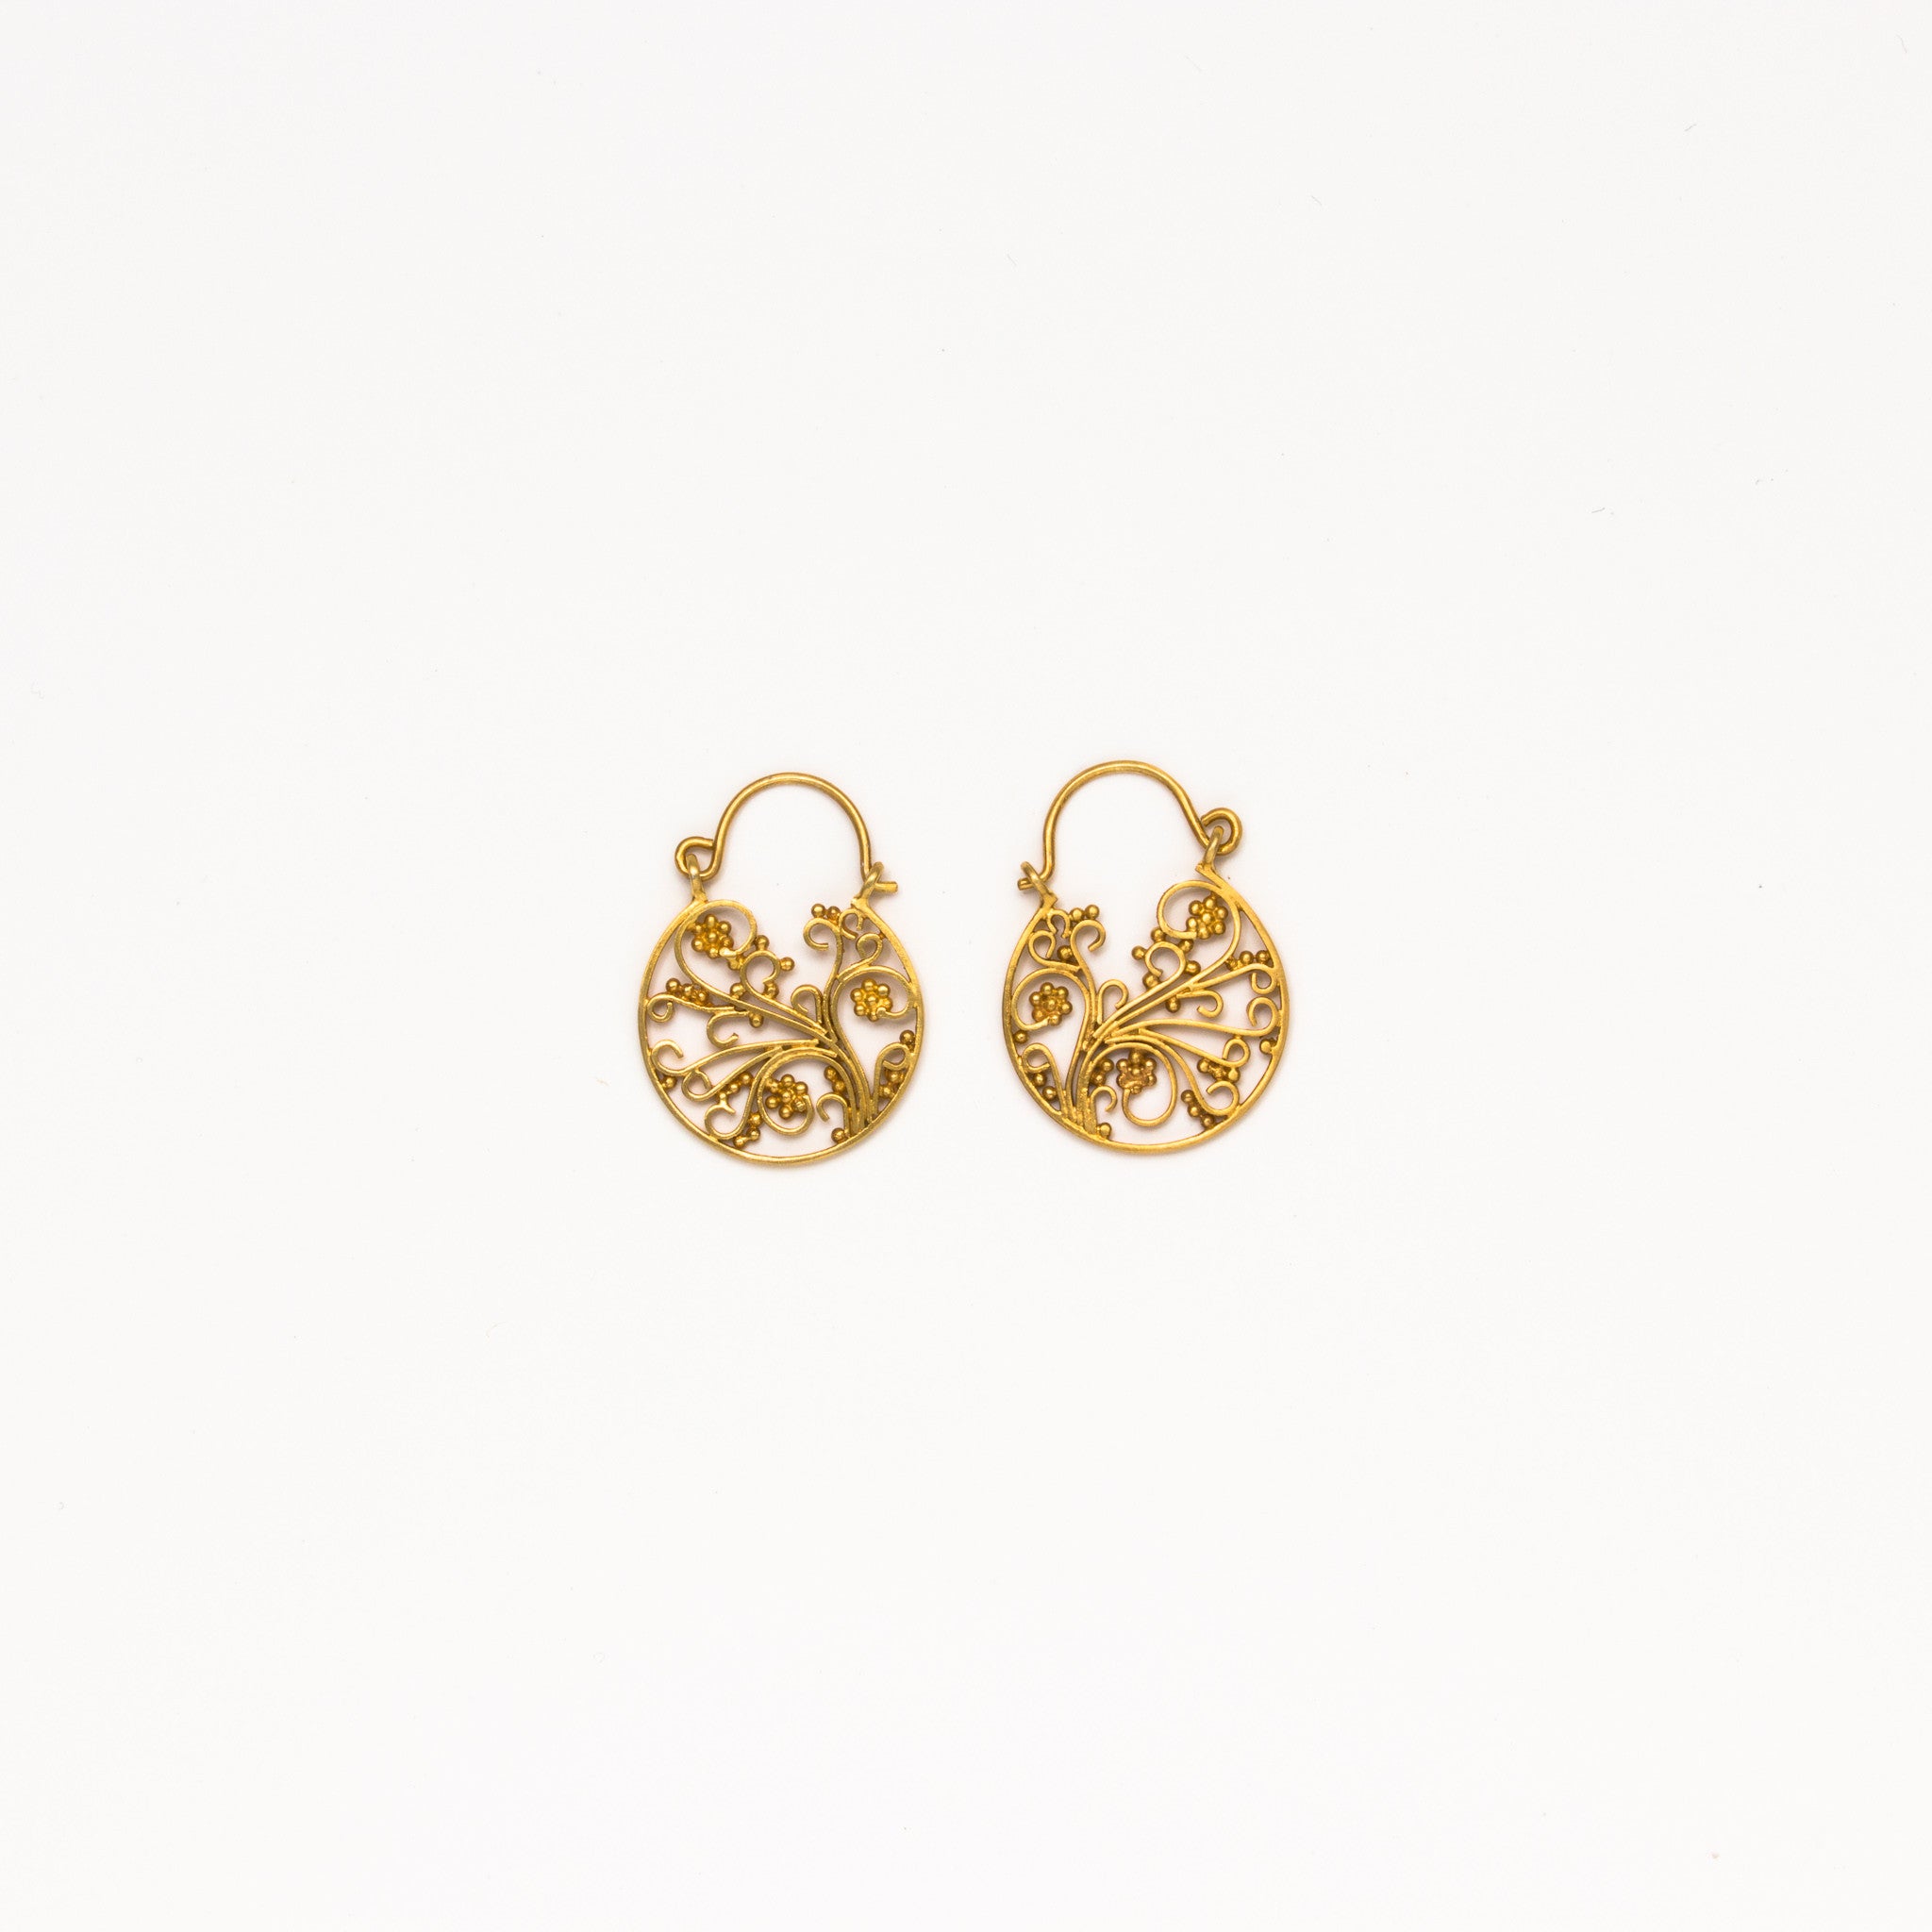 Blooming Earrings – soft mountains